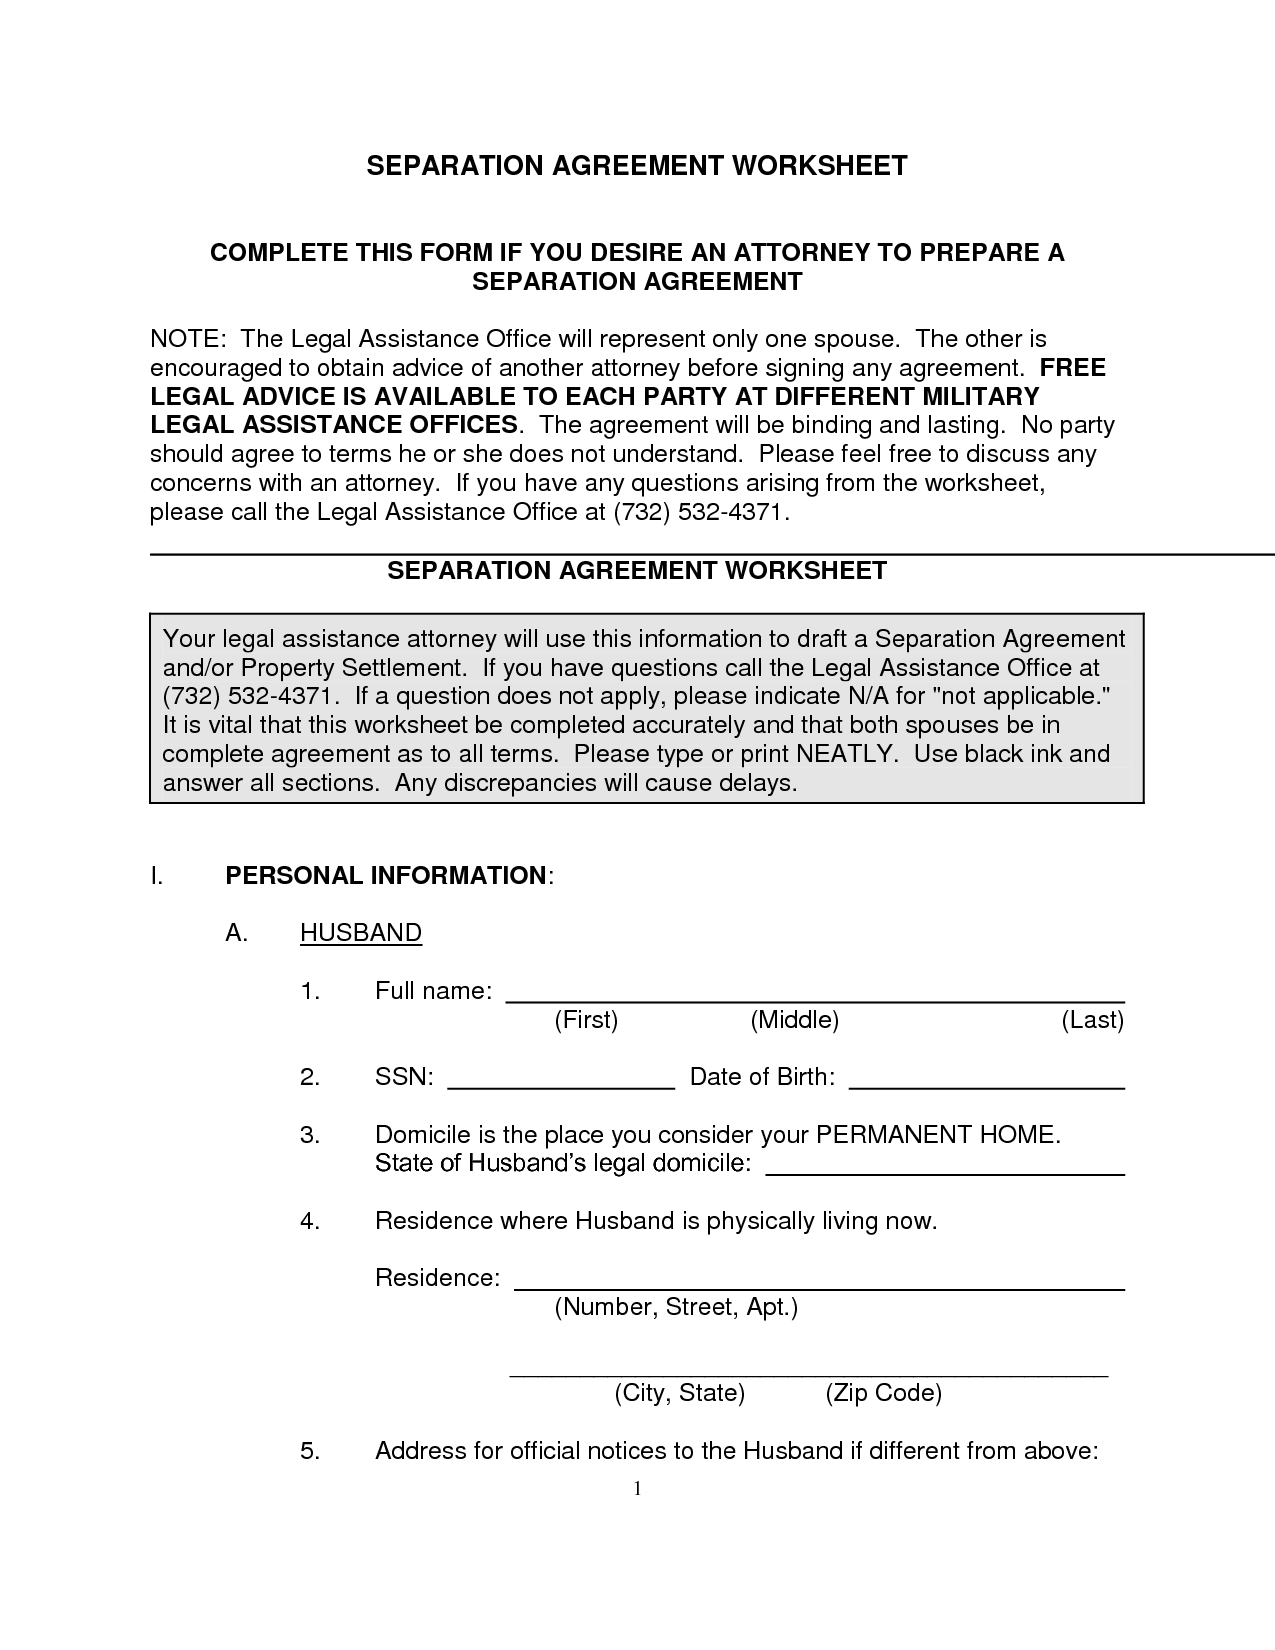 legal-agreement-forms-free-printable-documents